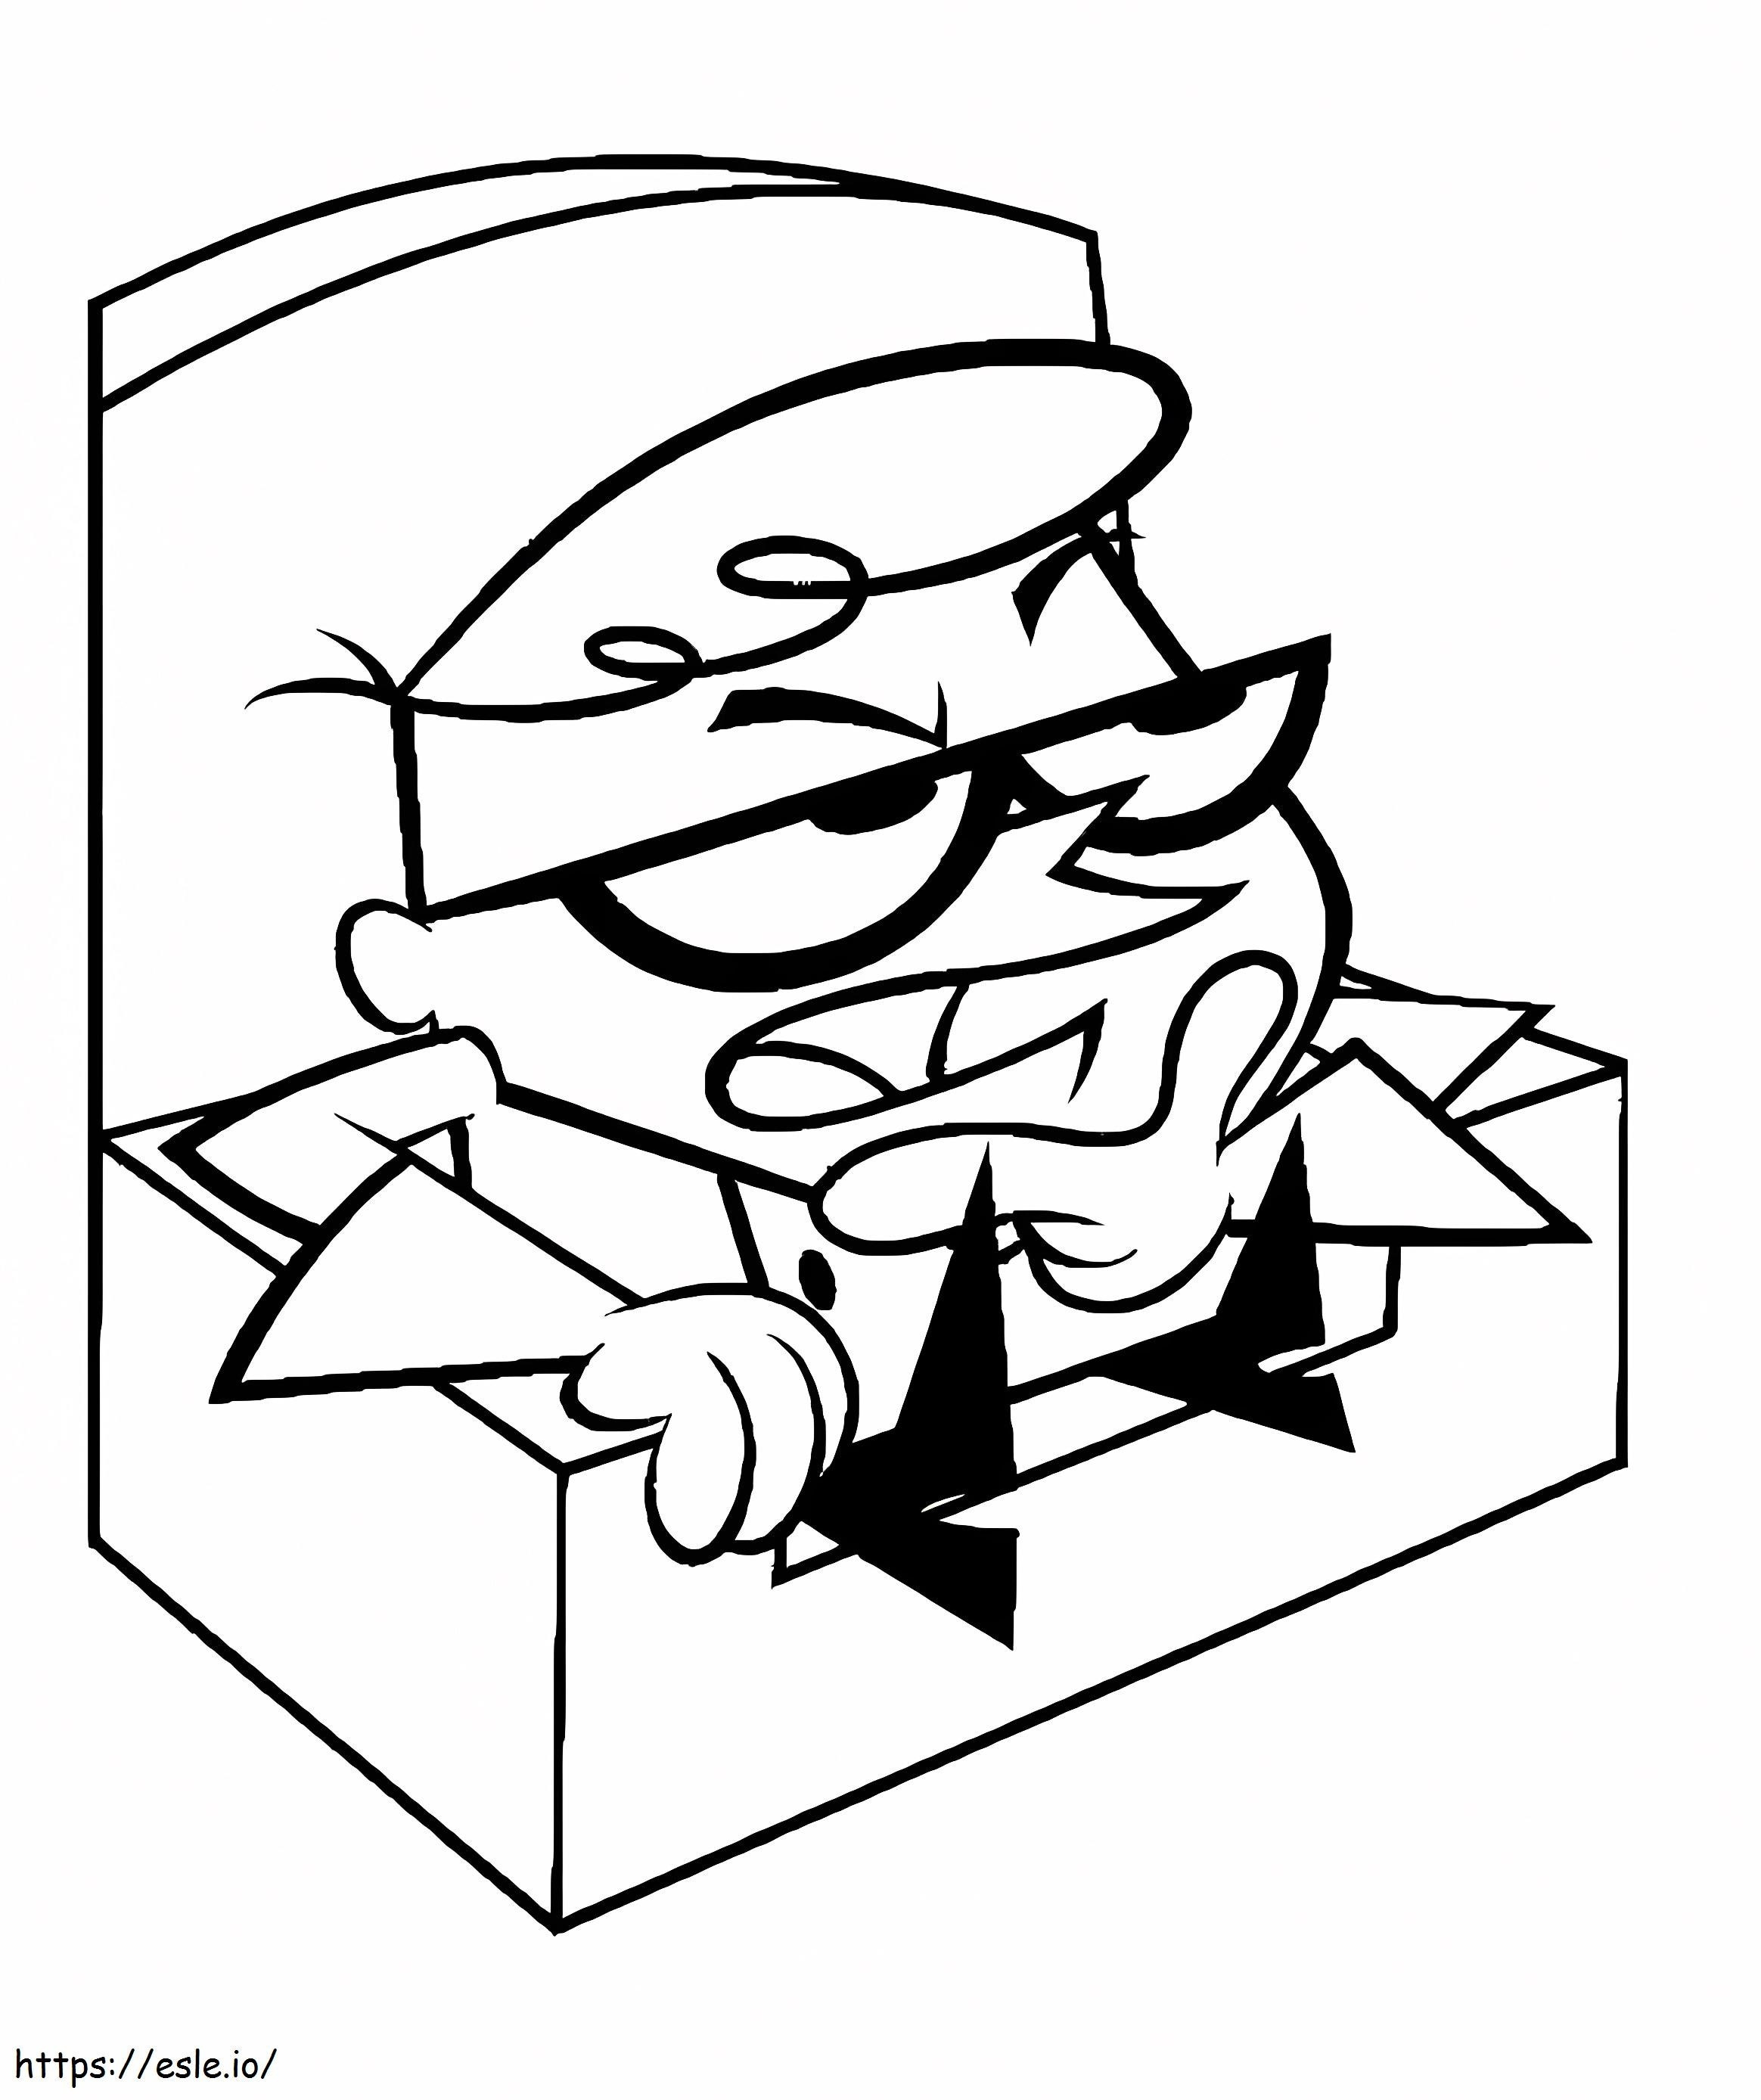 Dexter On Chair coloring page